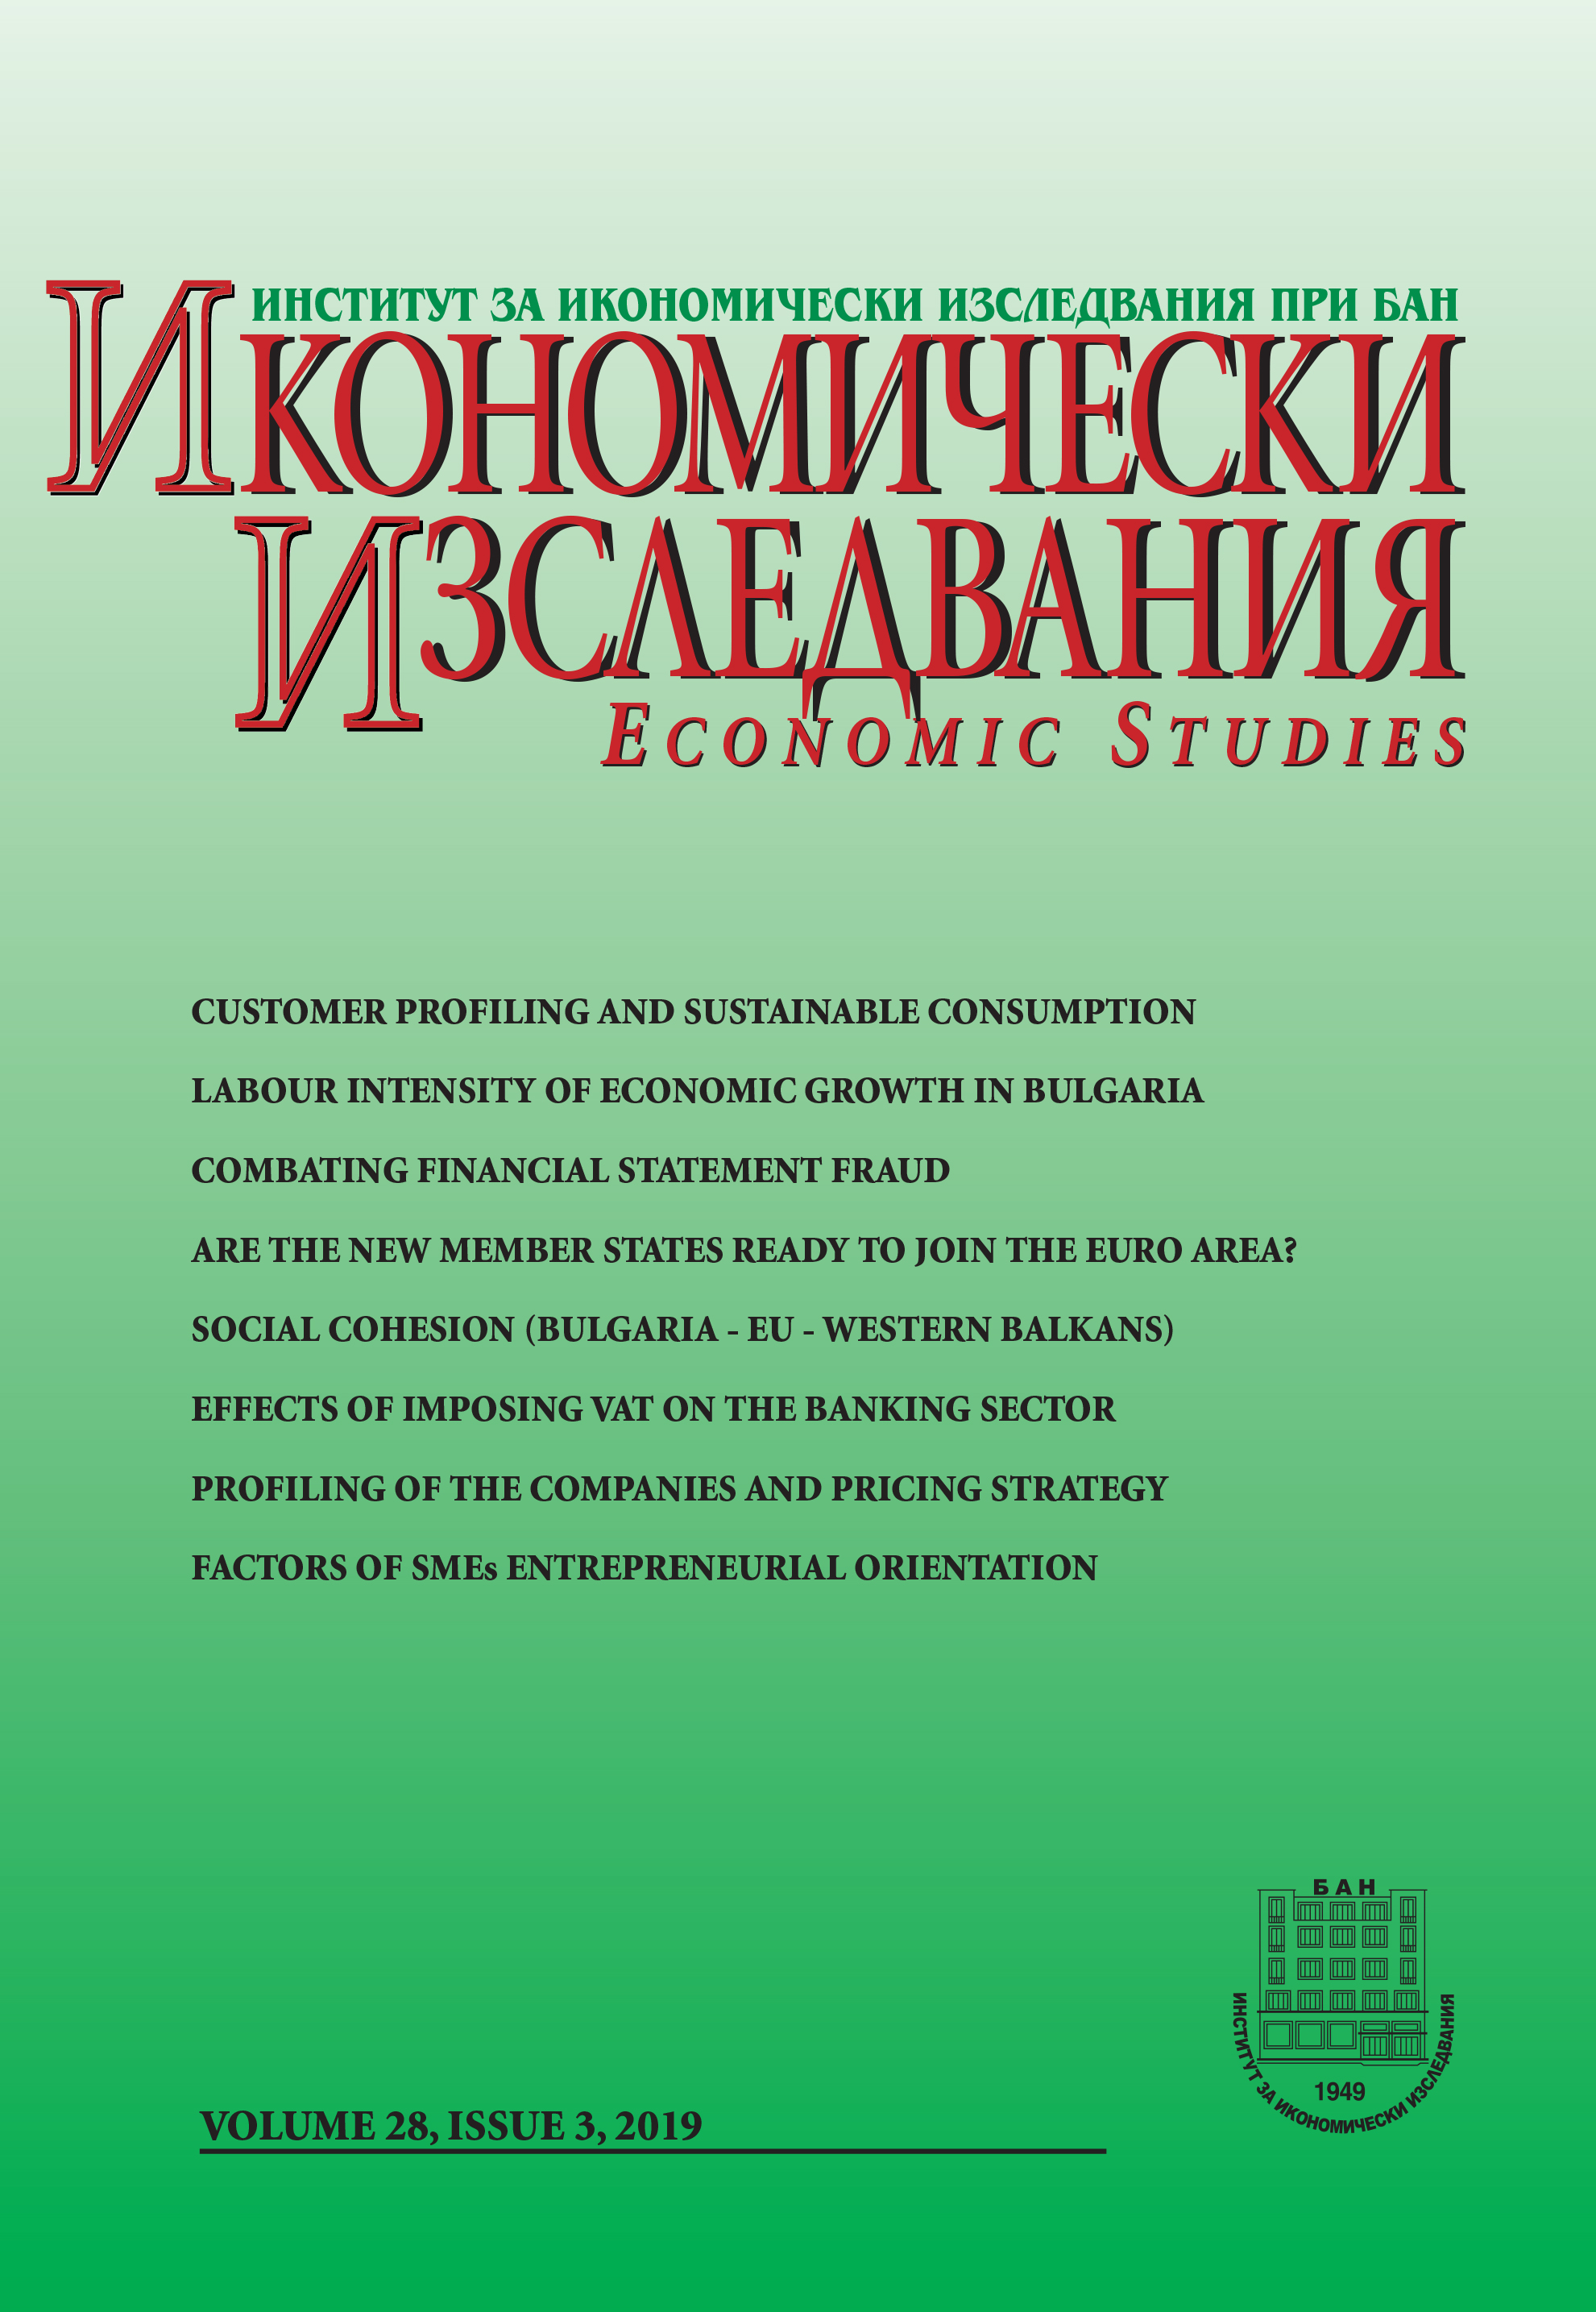 Combating Financial Statement Fraud – an Analysis and Model for the Republic of Bulgaria Cover Image